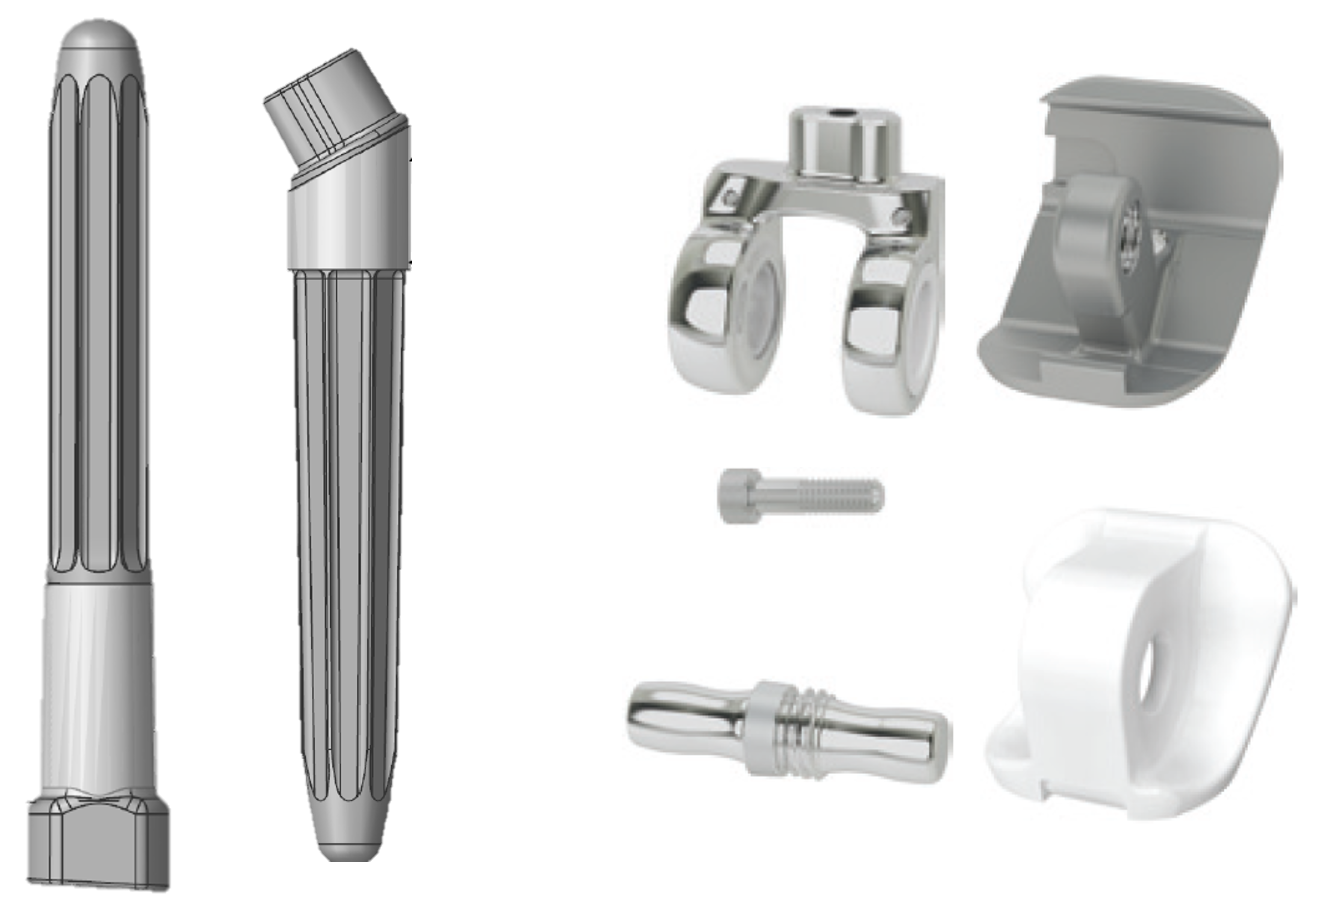 Device development engineers, surgeons and outside medical device companies collaborated to design the patient specific cementless humeral and ulnar stems.